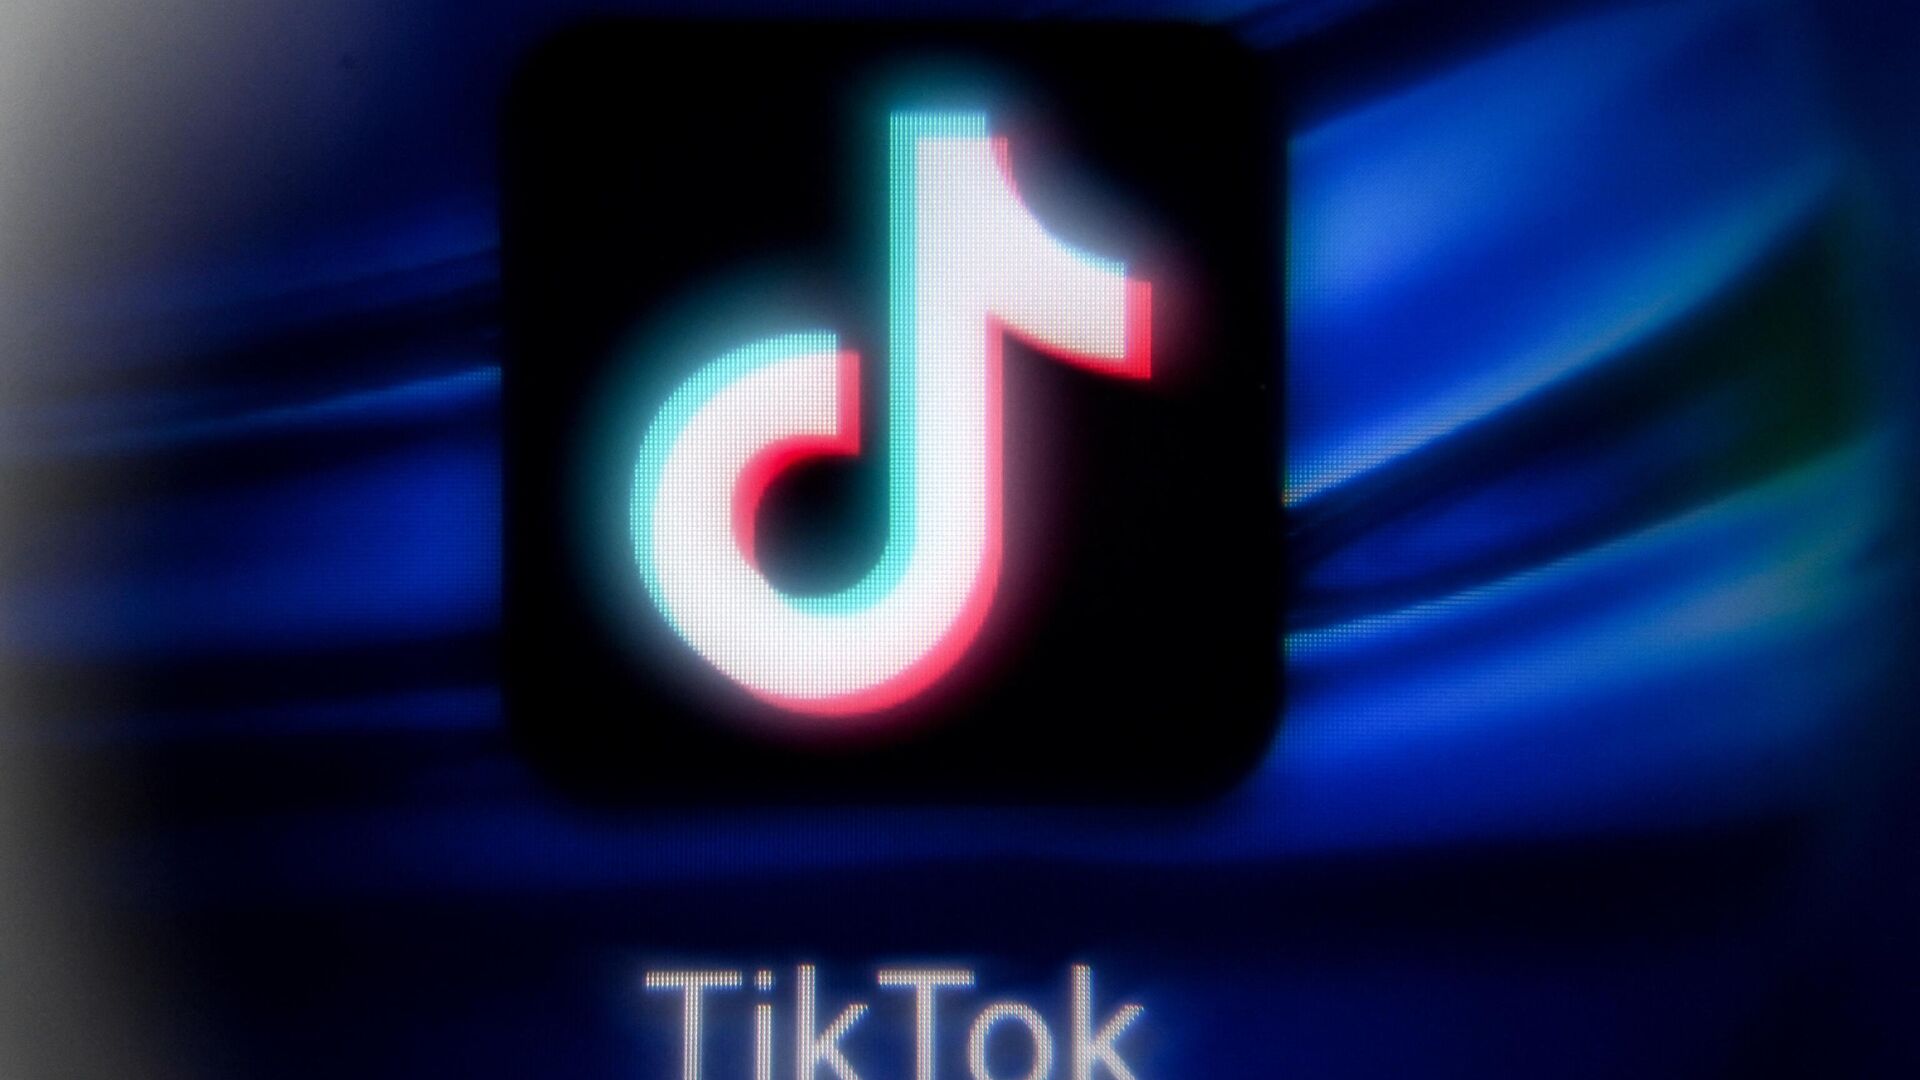 This picture taken in Moscow on November 11, 2021 shows the Chinese social networking service TikTok's logo on a tablet screen. - Sputnik International, 1920, 20.06.2022